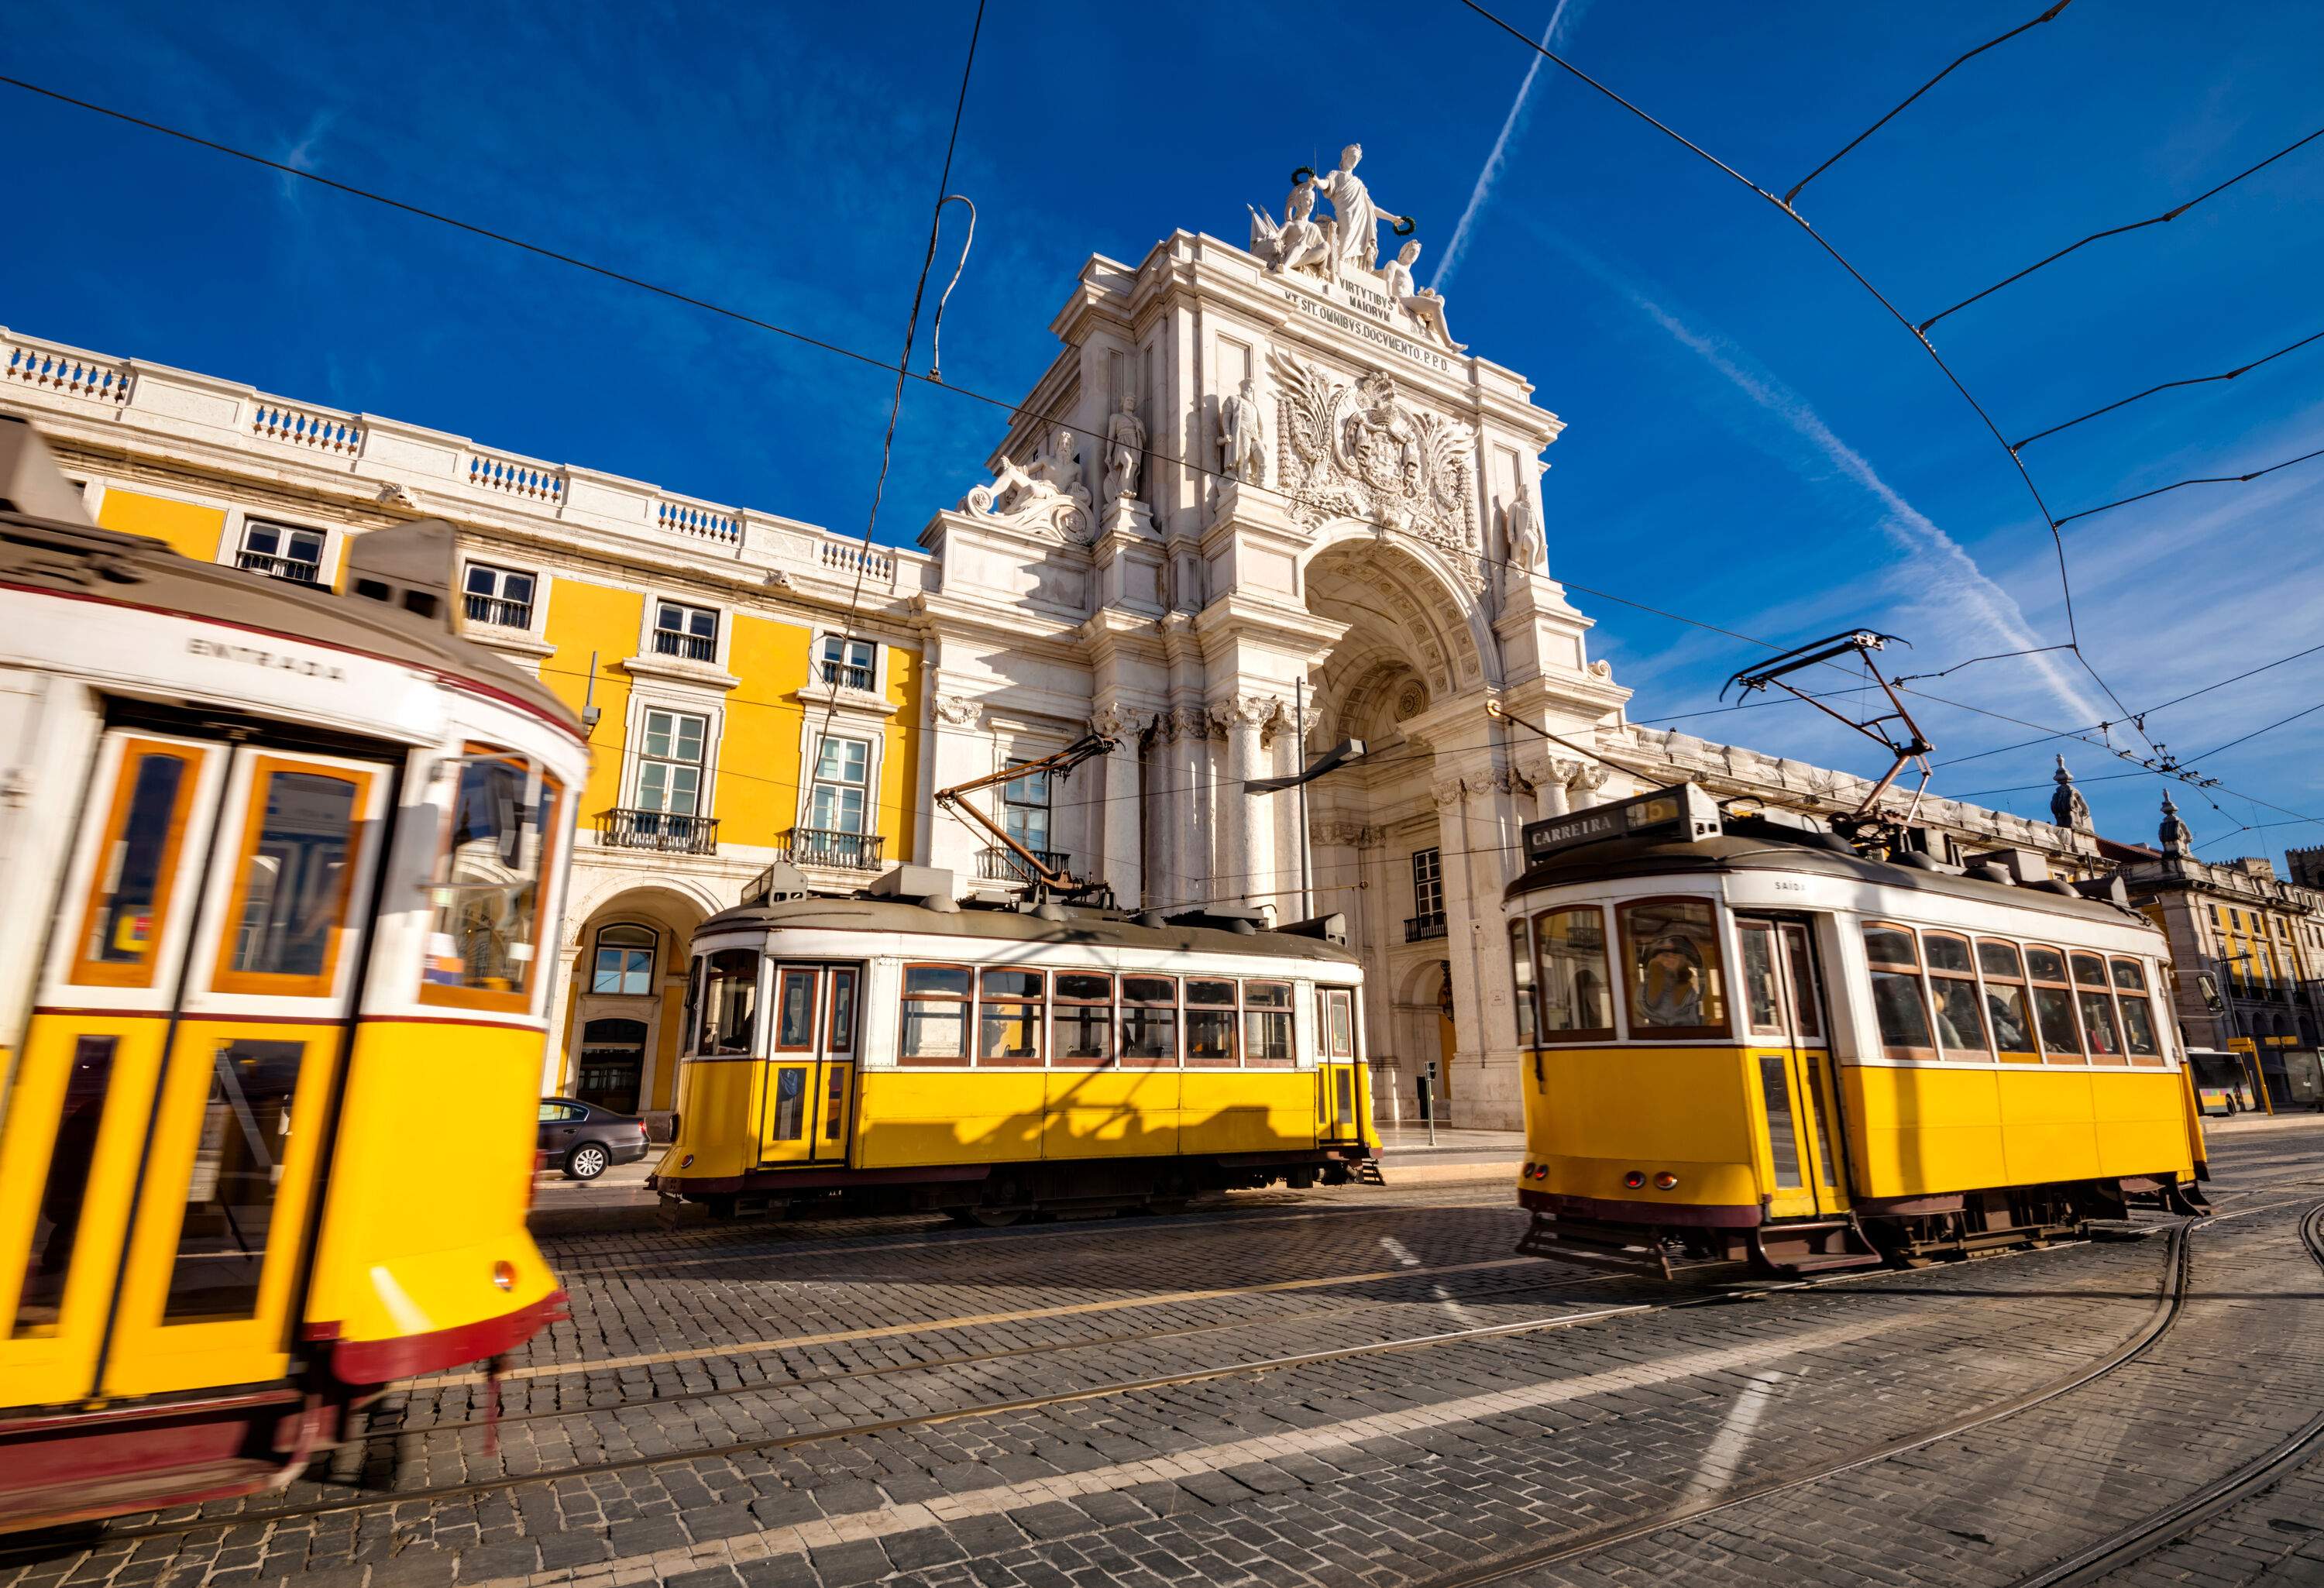 Three yellow trams travel along a yellow building with a pillared memorial arch in the middle.